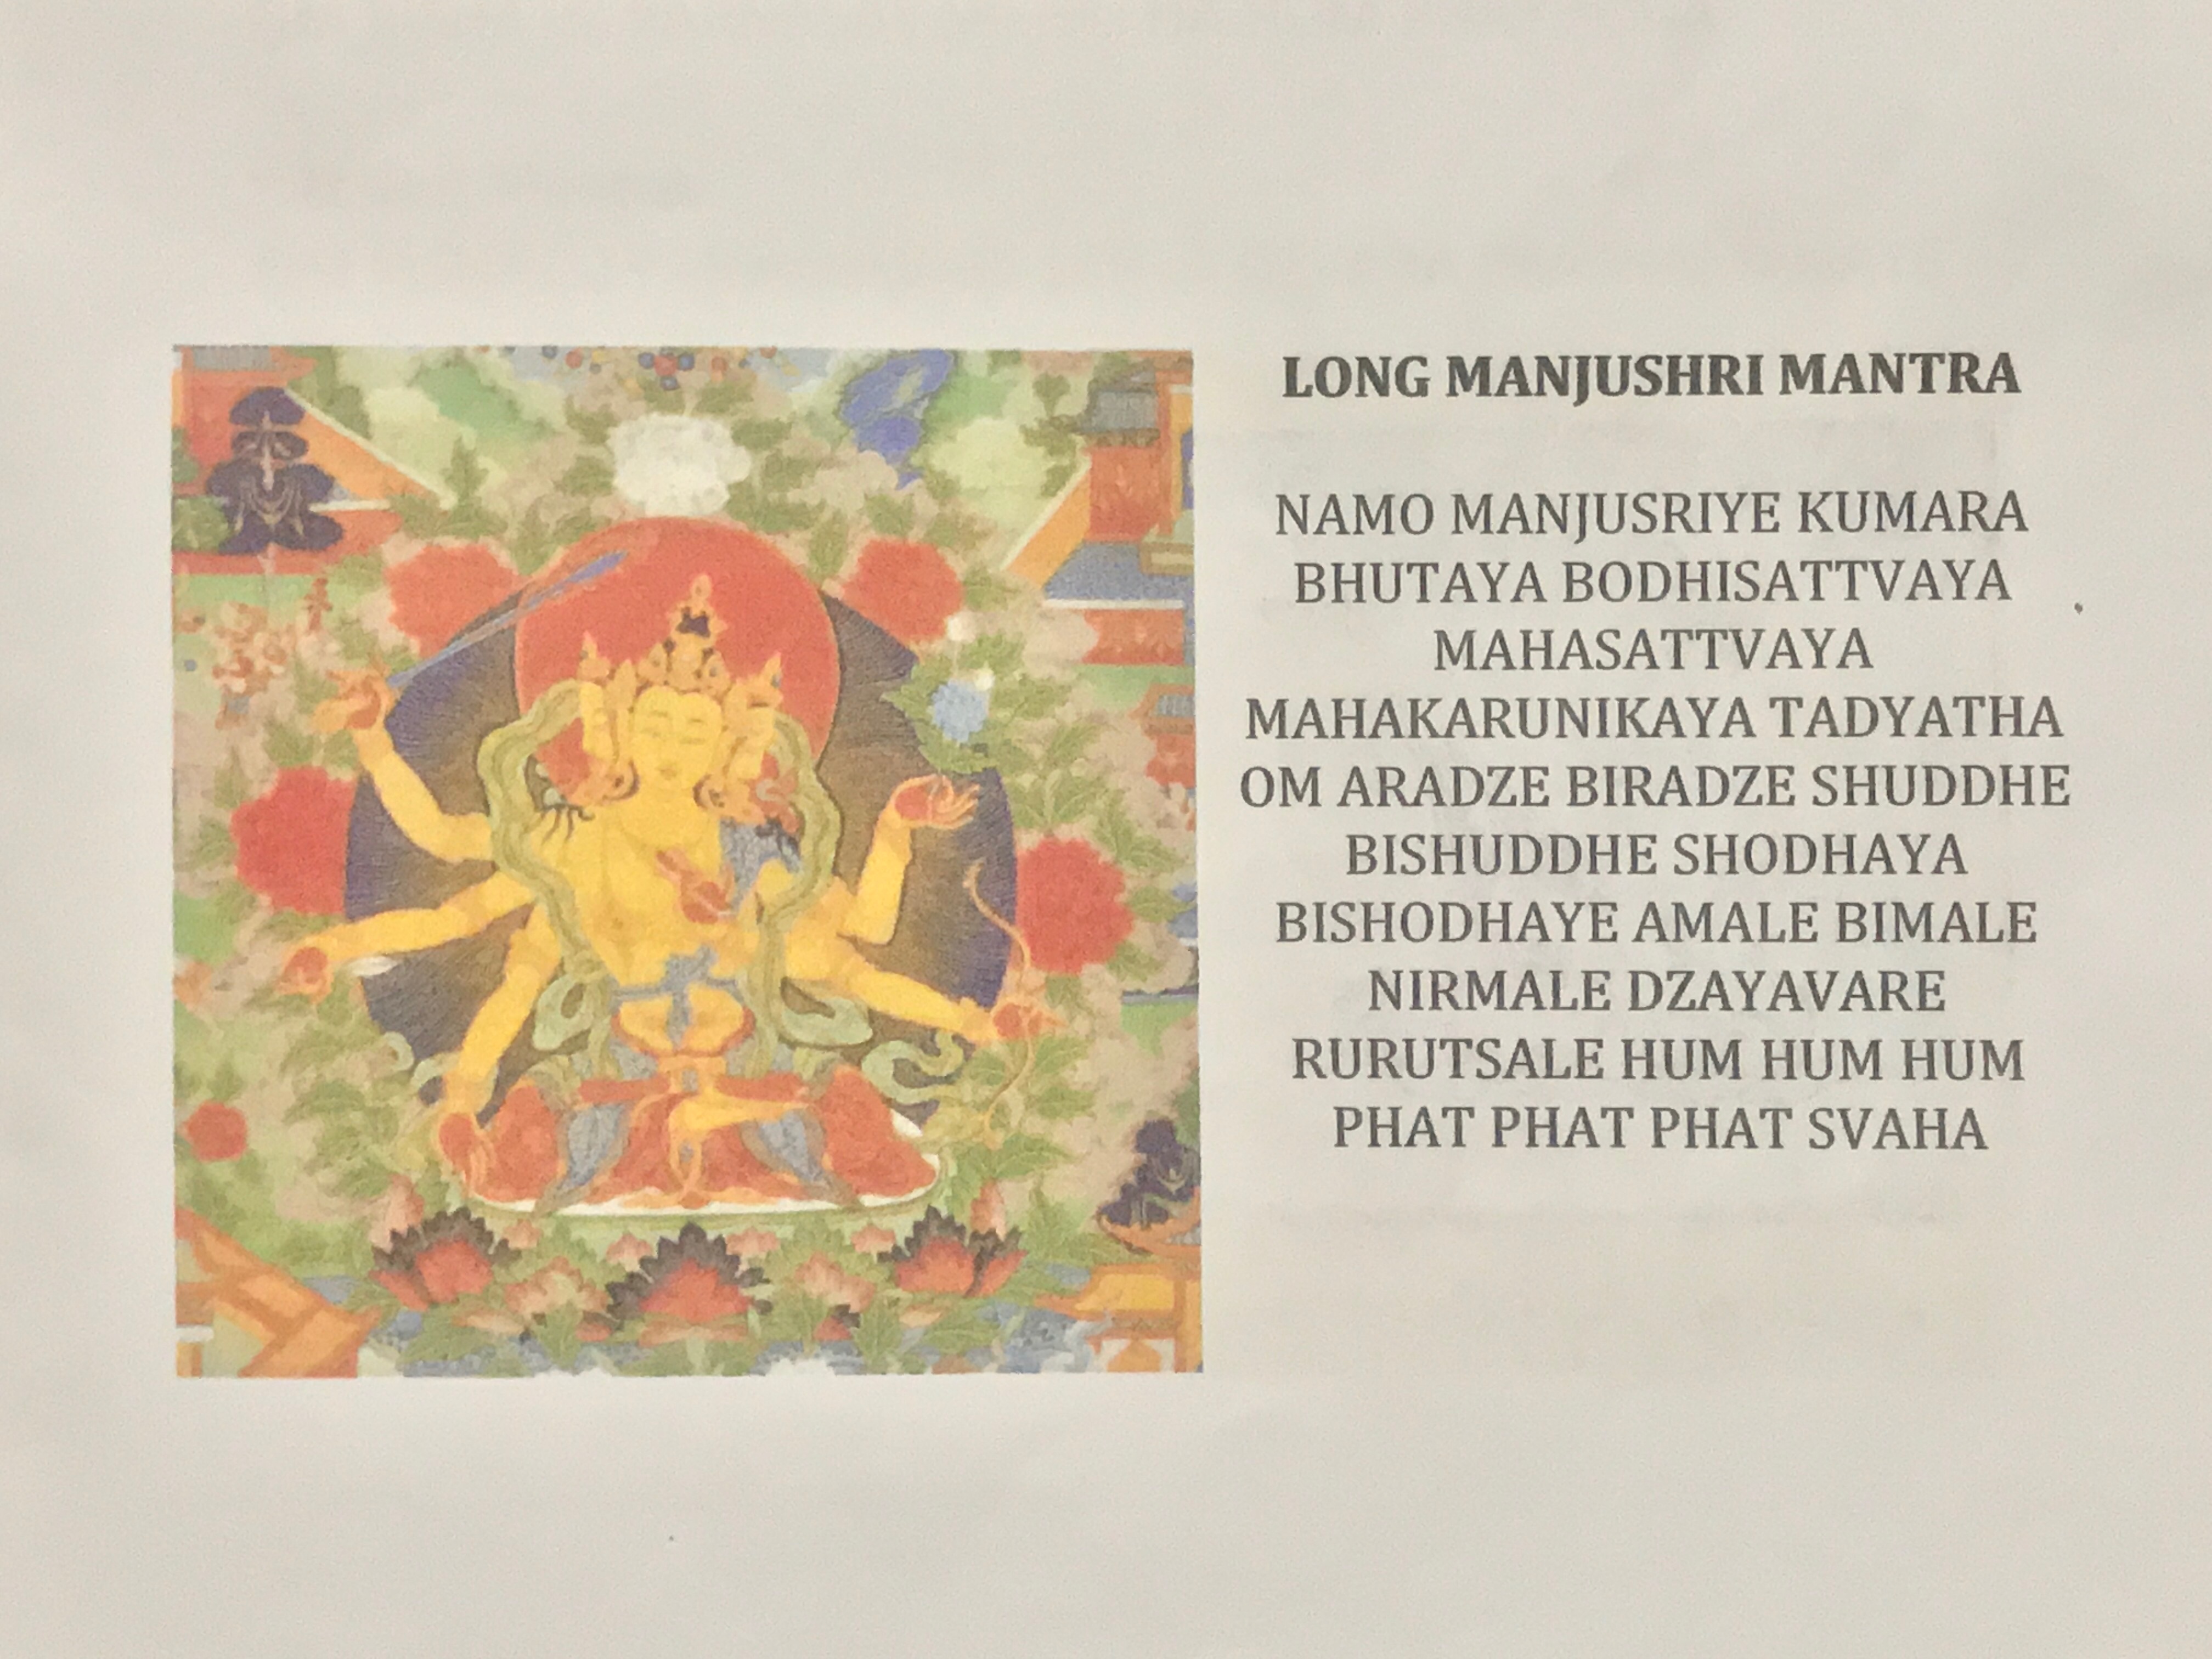 Here's the long and sacred mantra of Manjushri I present to all my friends and readers. May you be blessed by this supreme being always. 